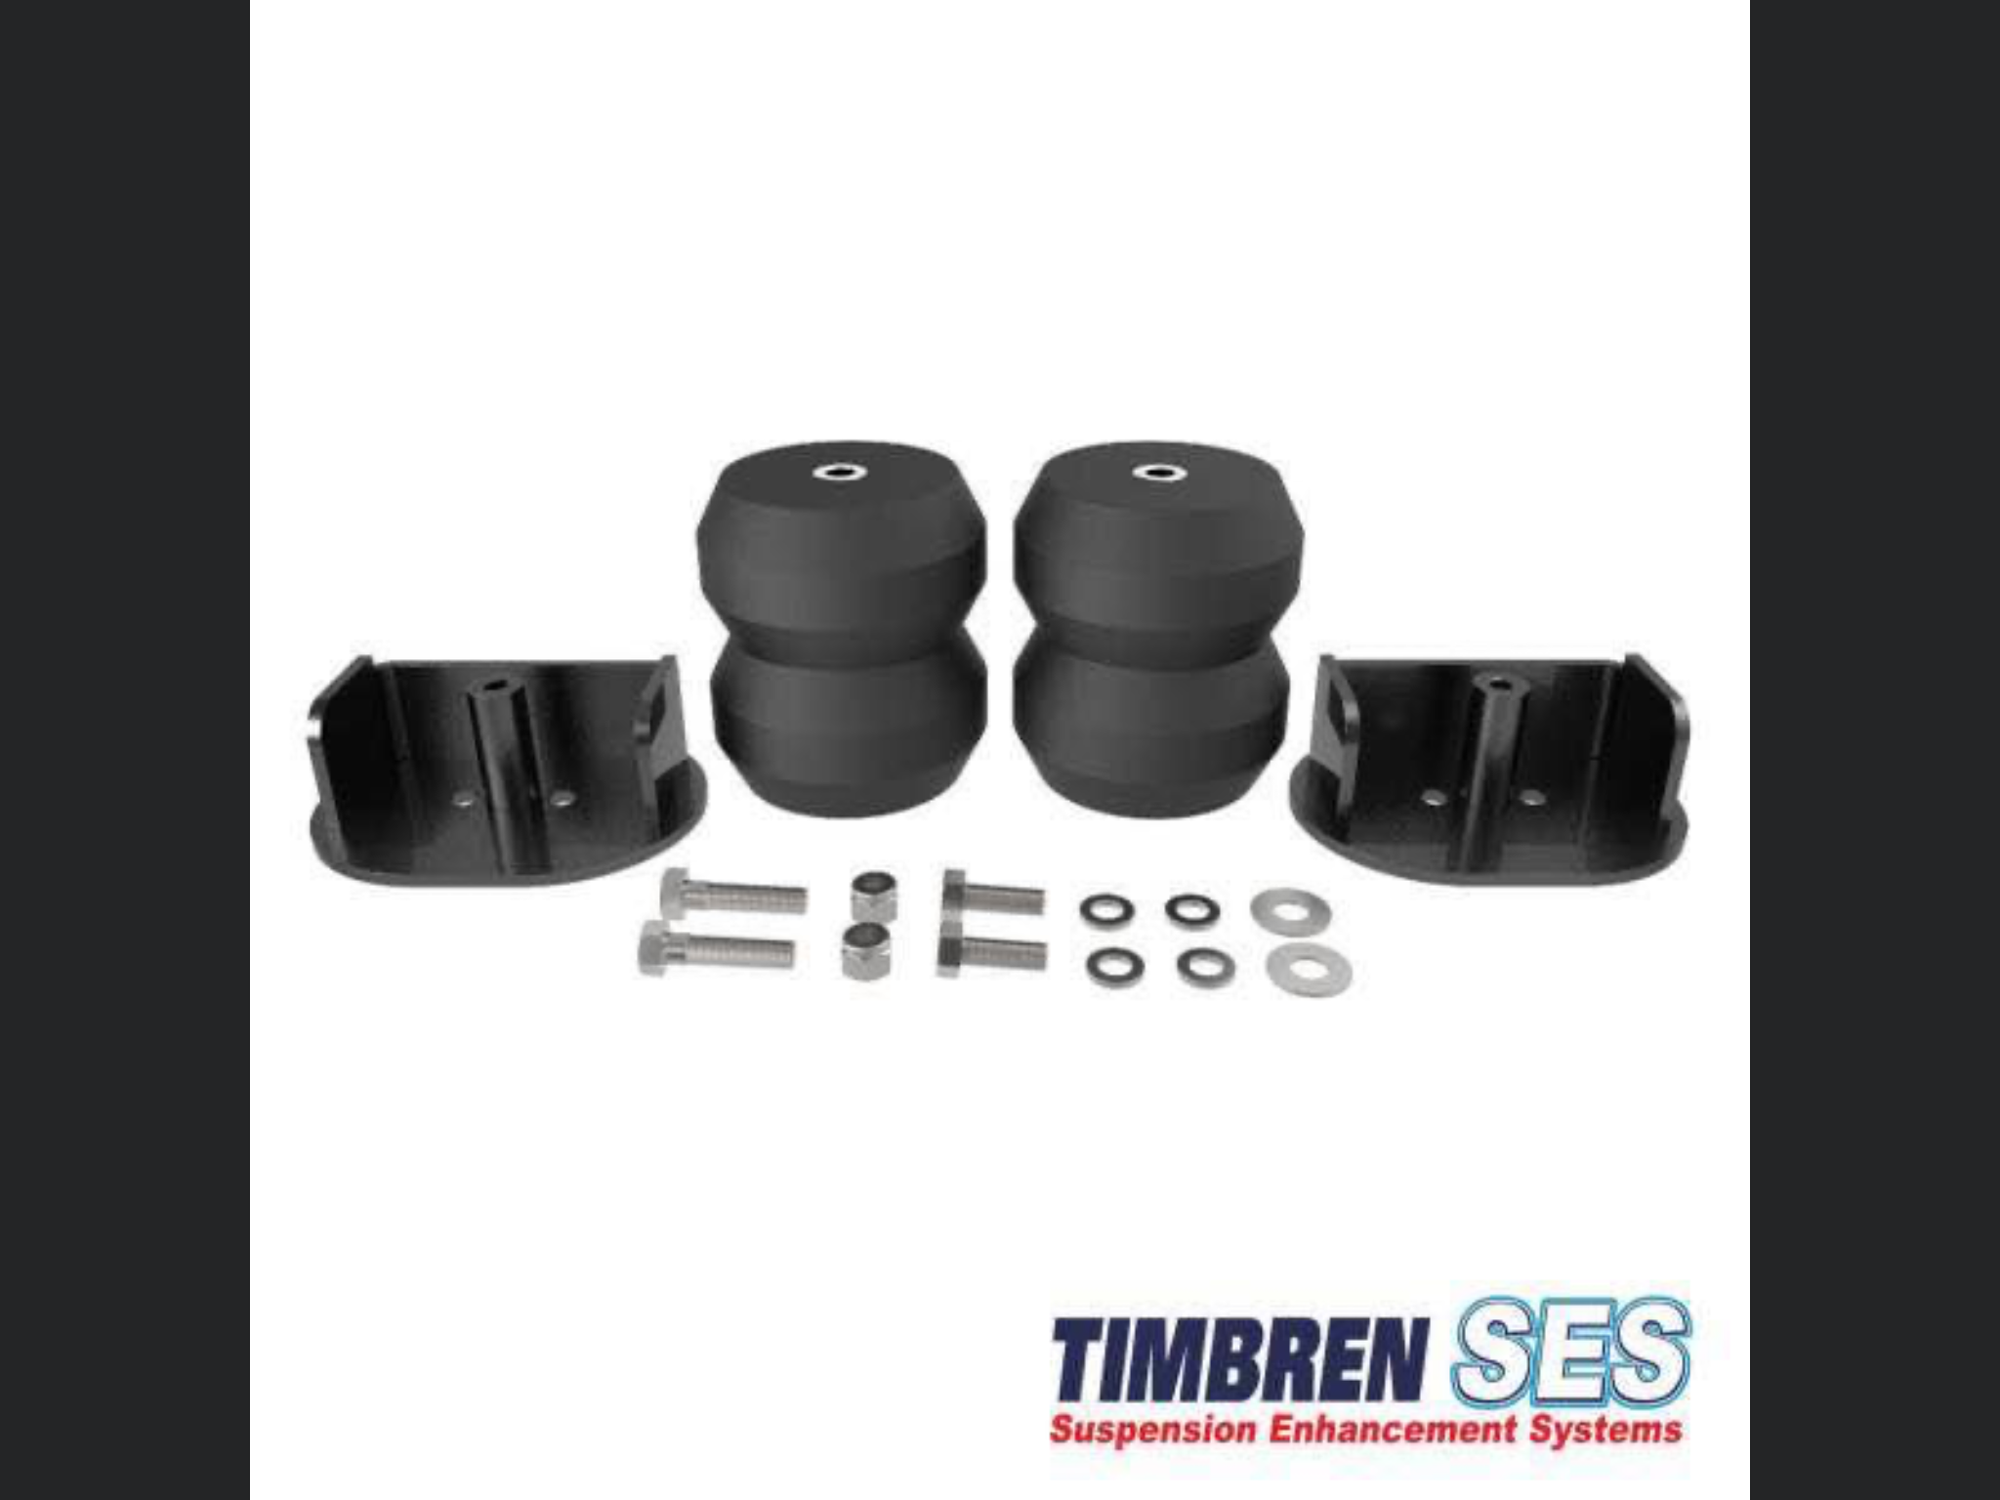 Steering/Suspension - Timbrens SES for 2011 to 2016 F250, F350 - New - 2011 to 2016 Ford F-250 Super Duty - Linesville, PA 16424, United States